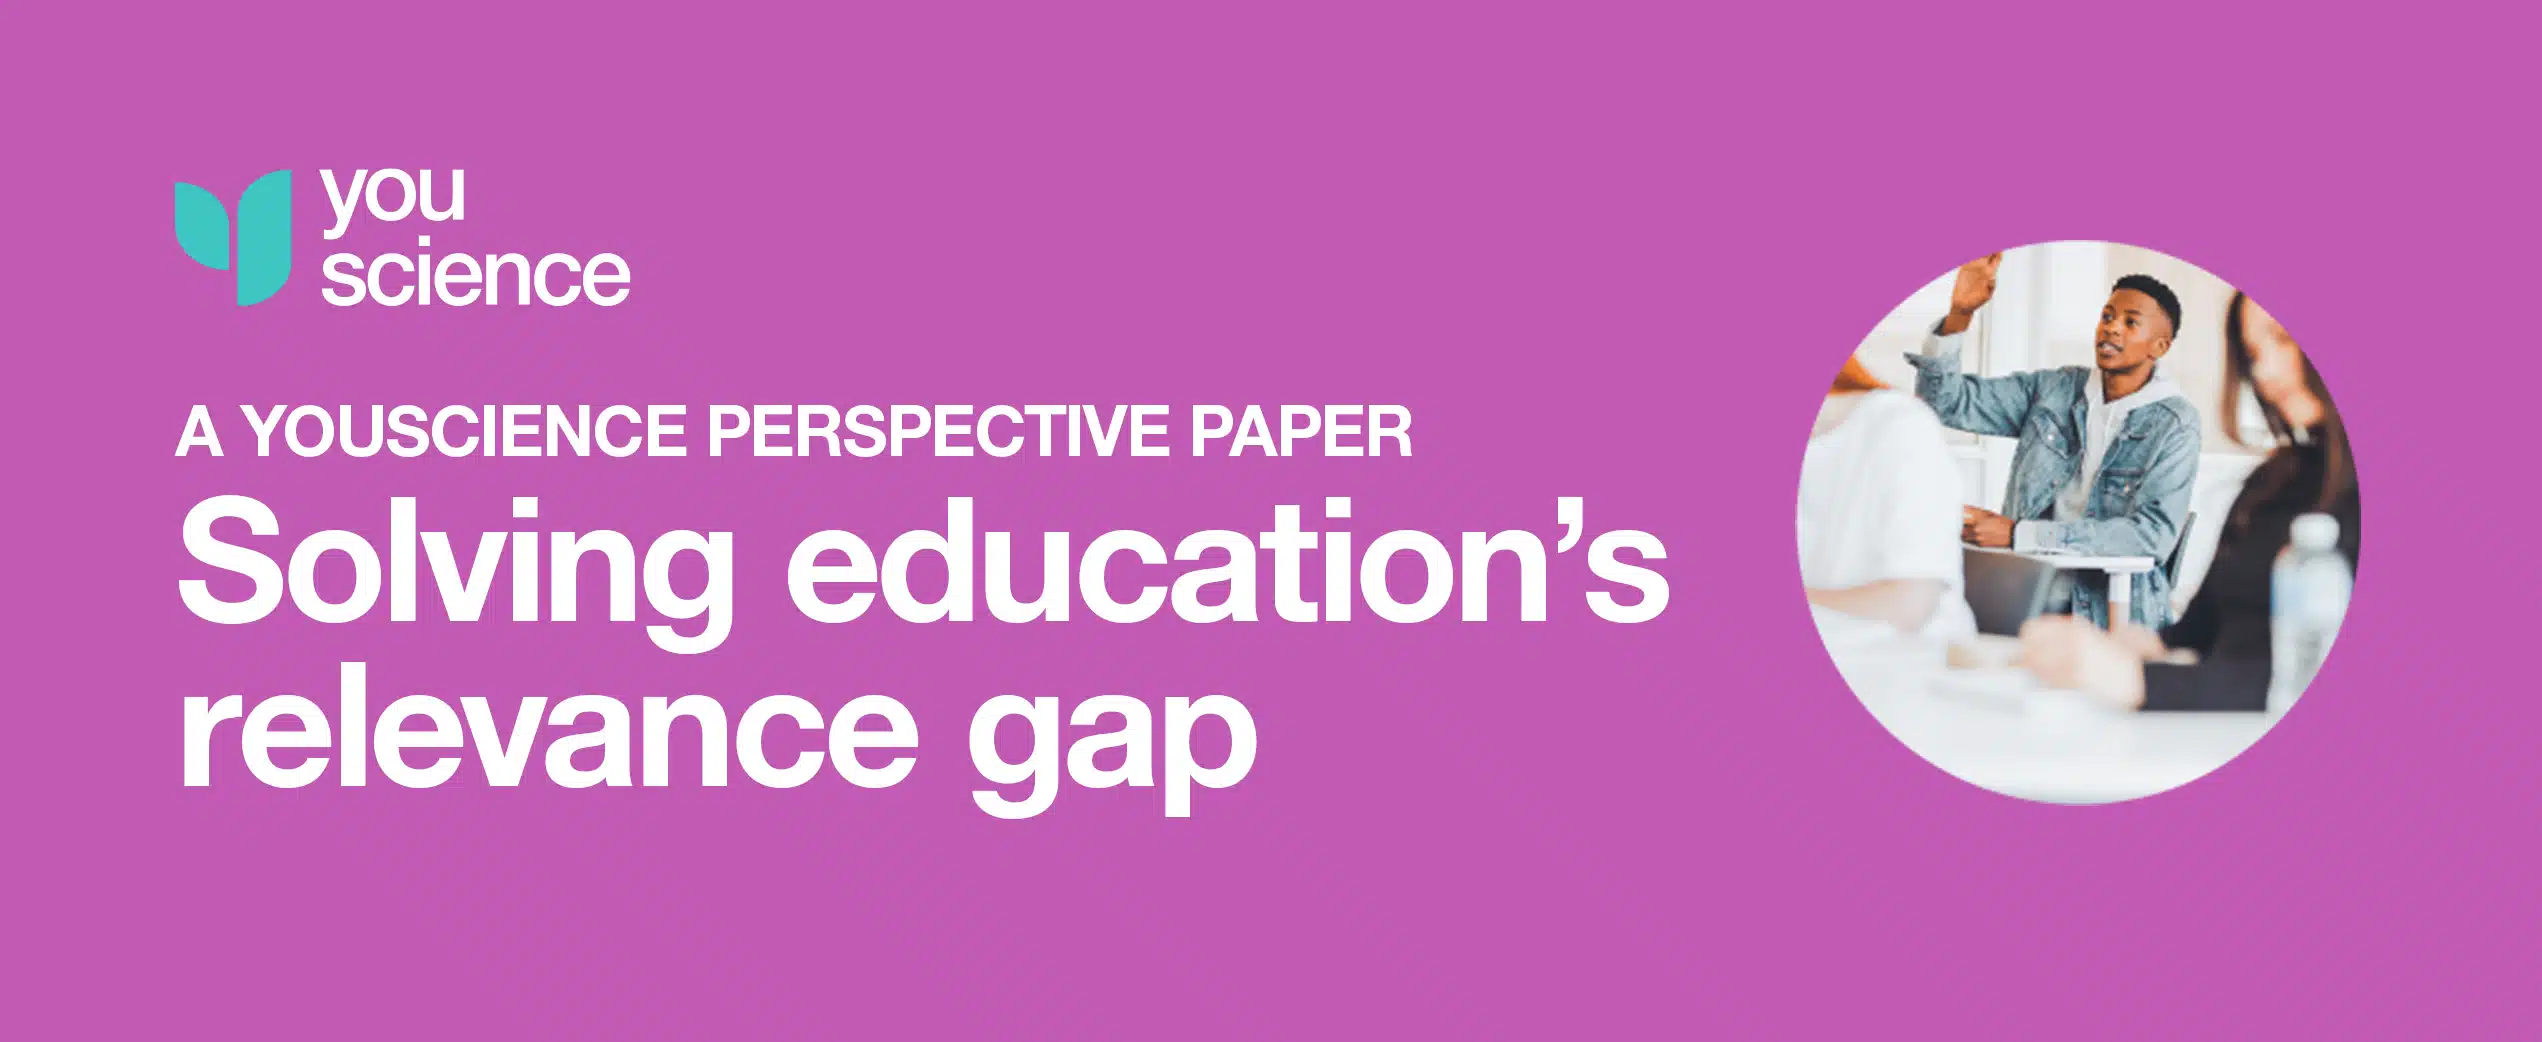 Educational perspective: Solving education’s relevance gap